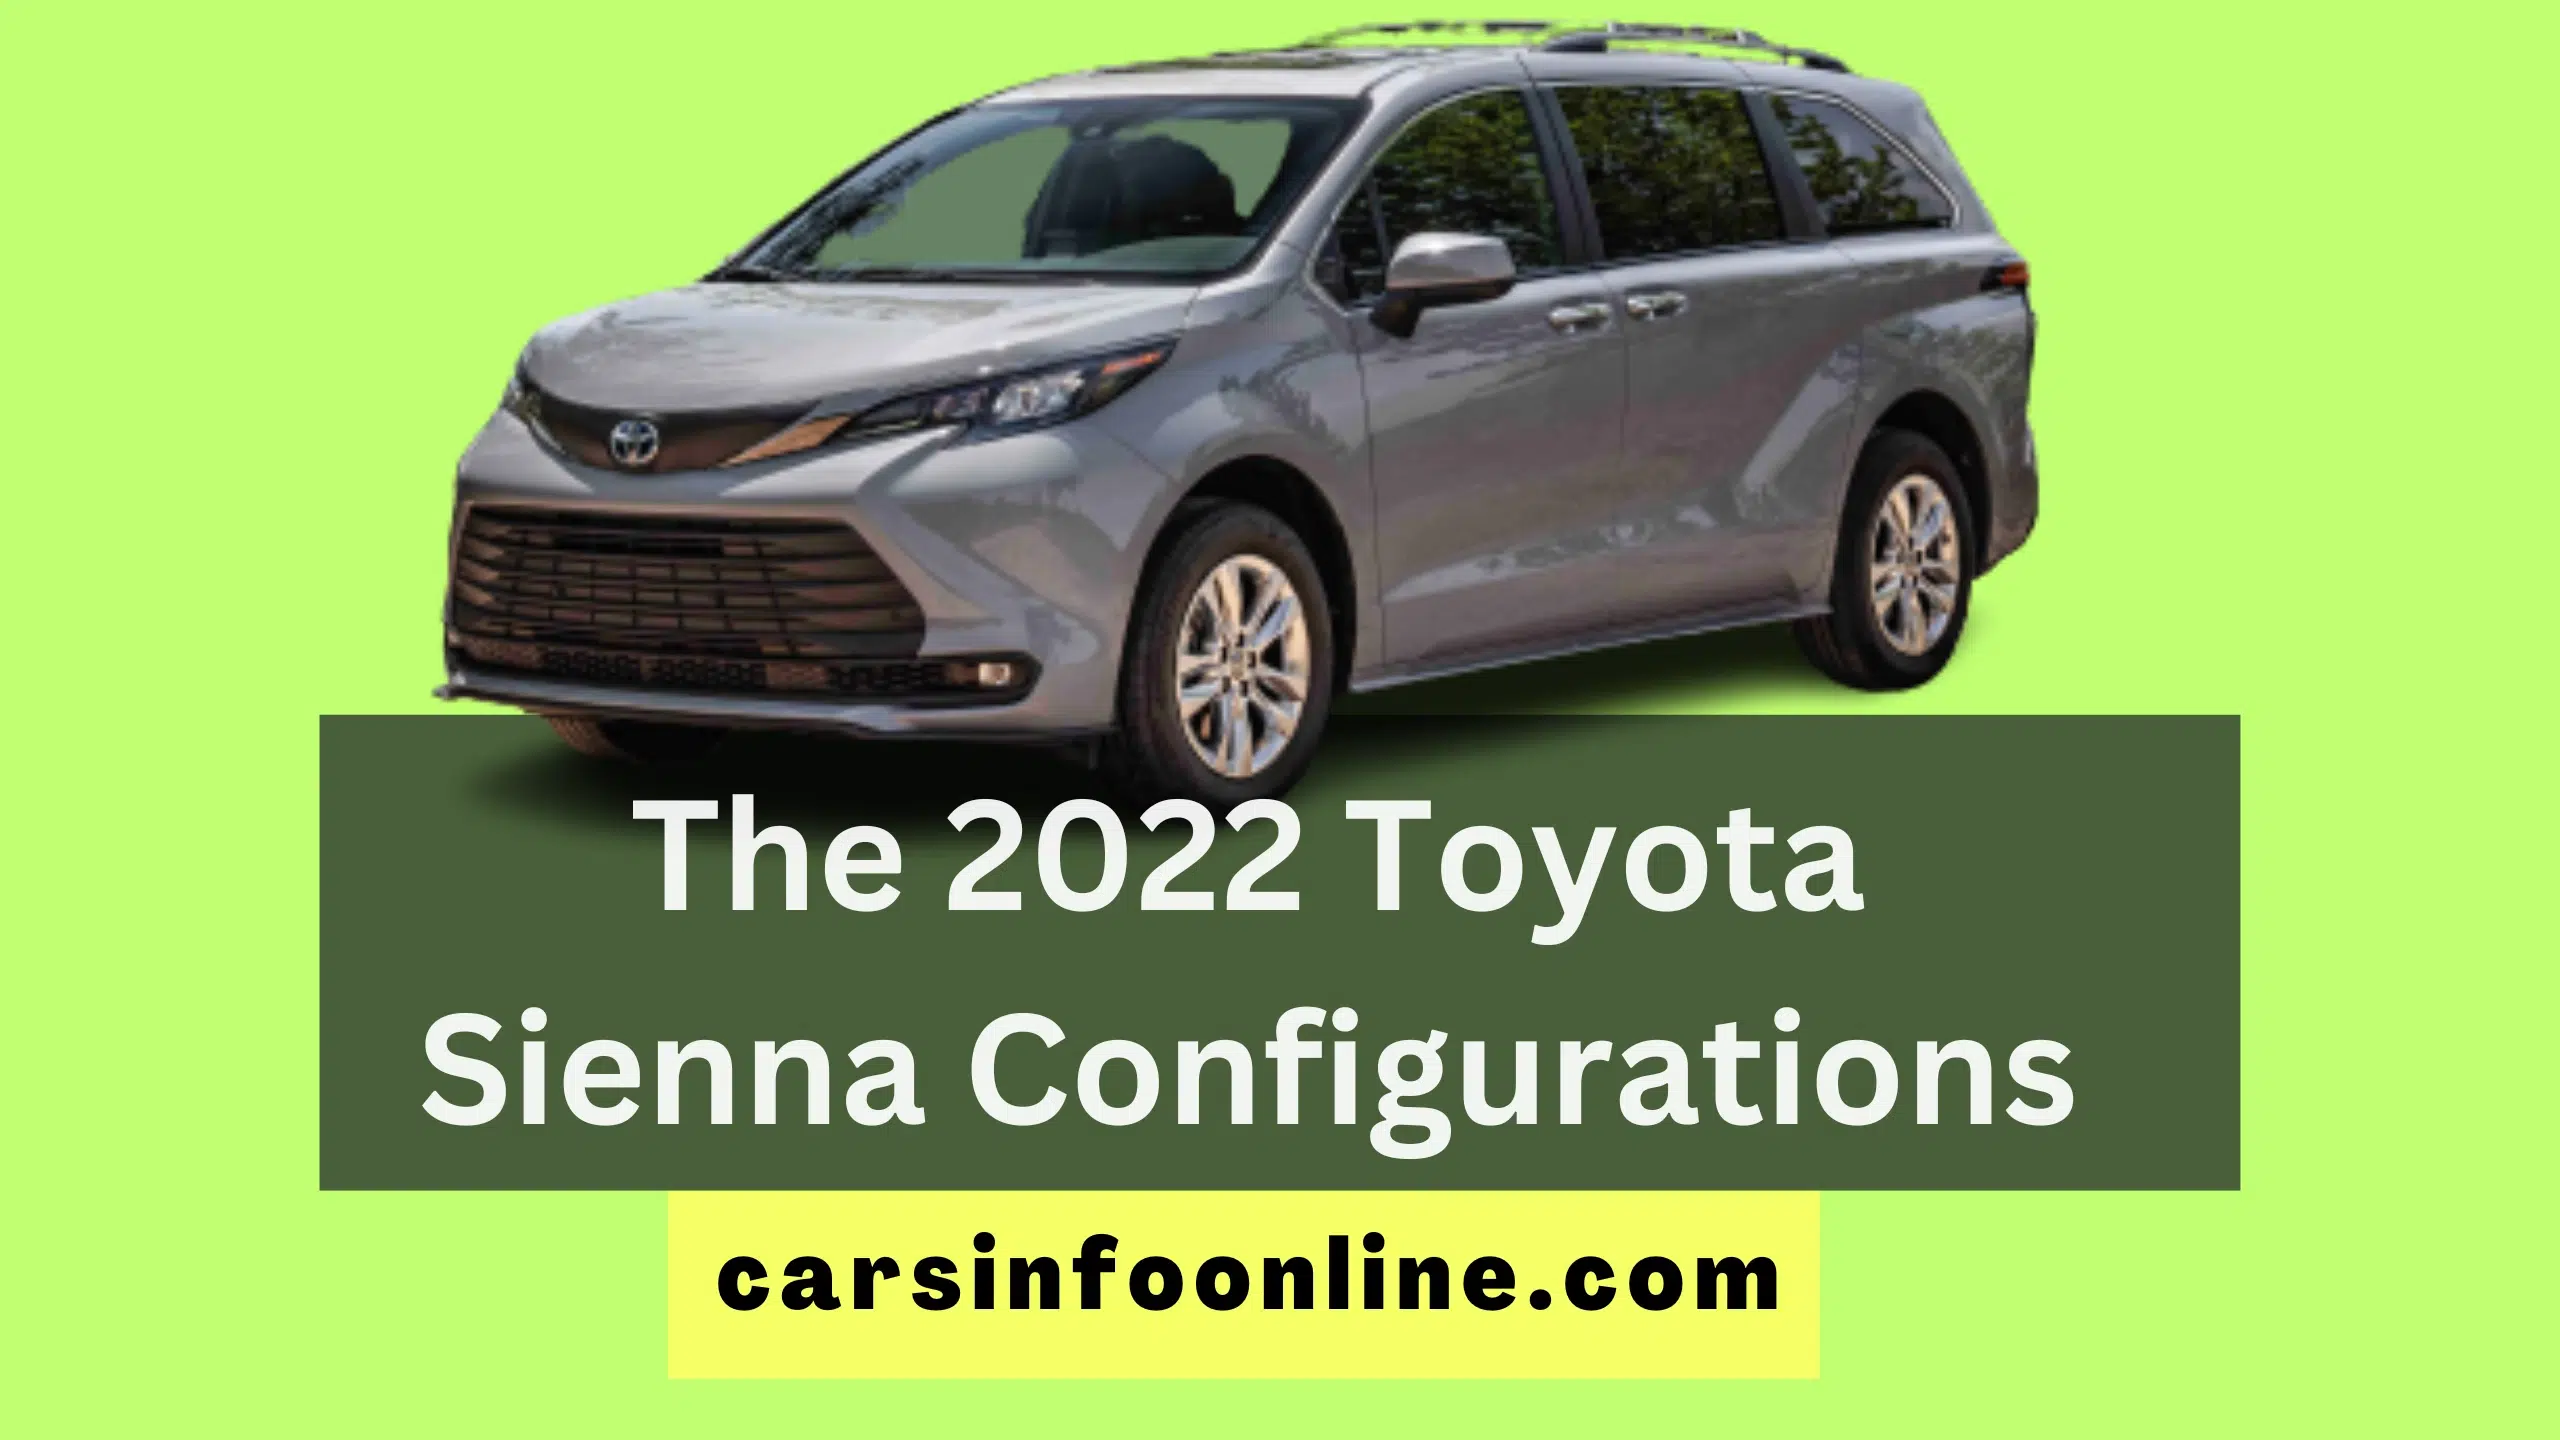 The 2022 Toyota Sienna Configurations